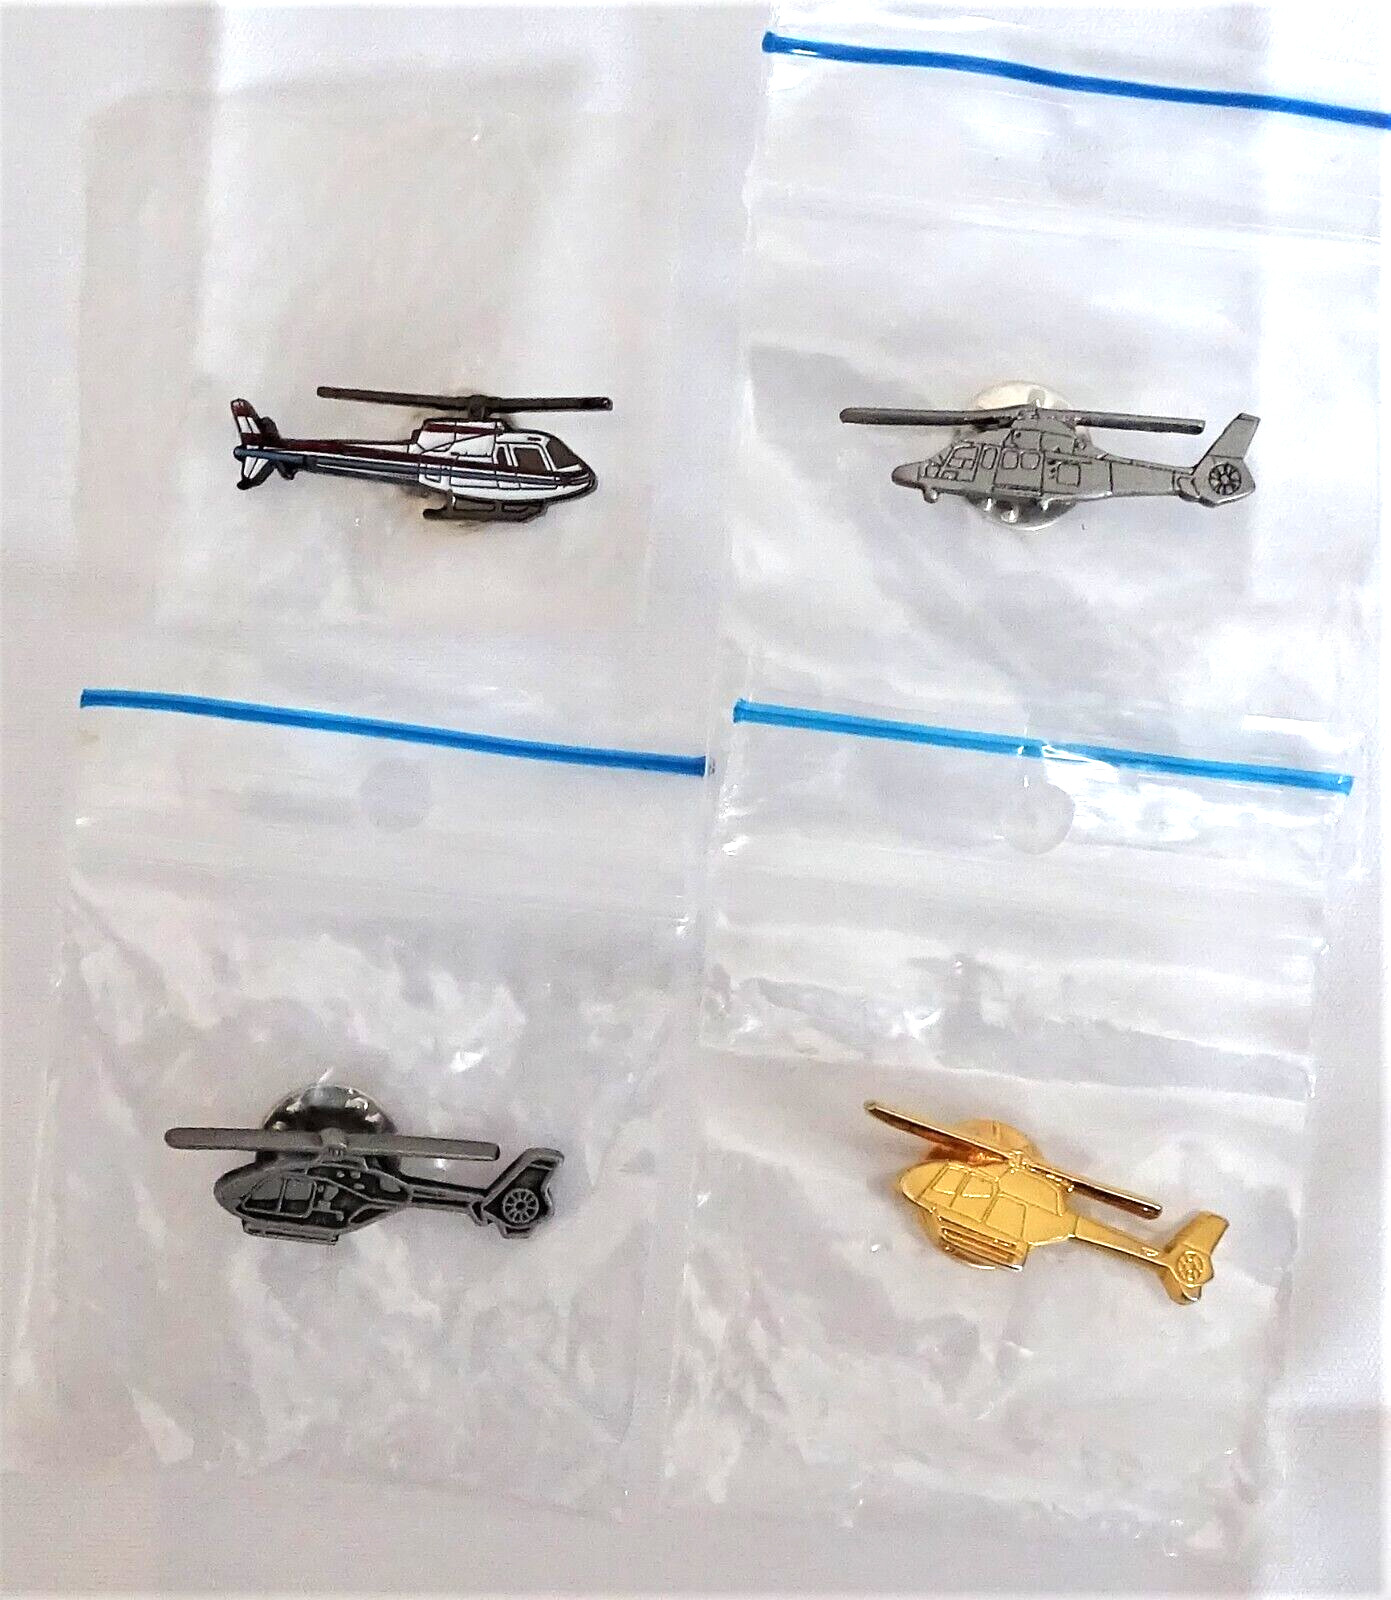 LOT OF 4 - Orig EUROCOPTER AIRBUS H120 H125 H135 H155 helicopter Lapel/Hat Pin